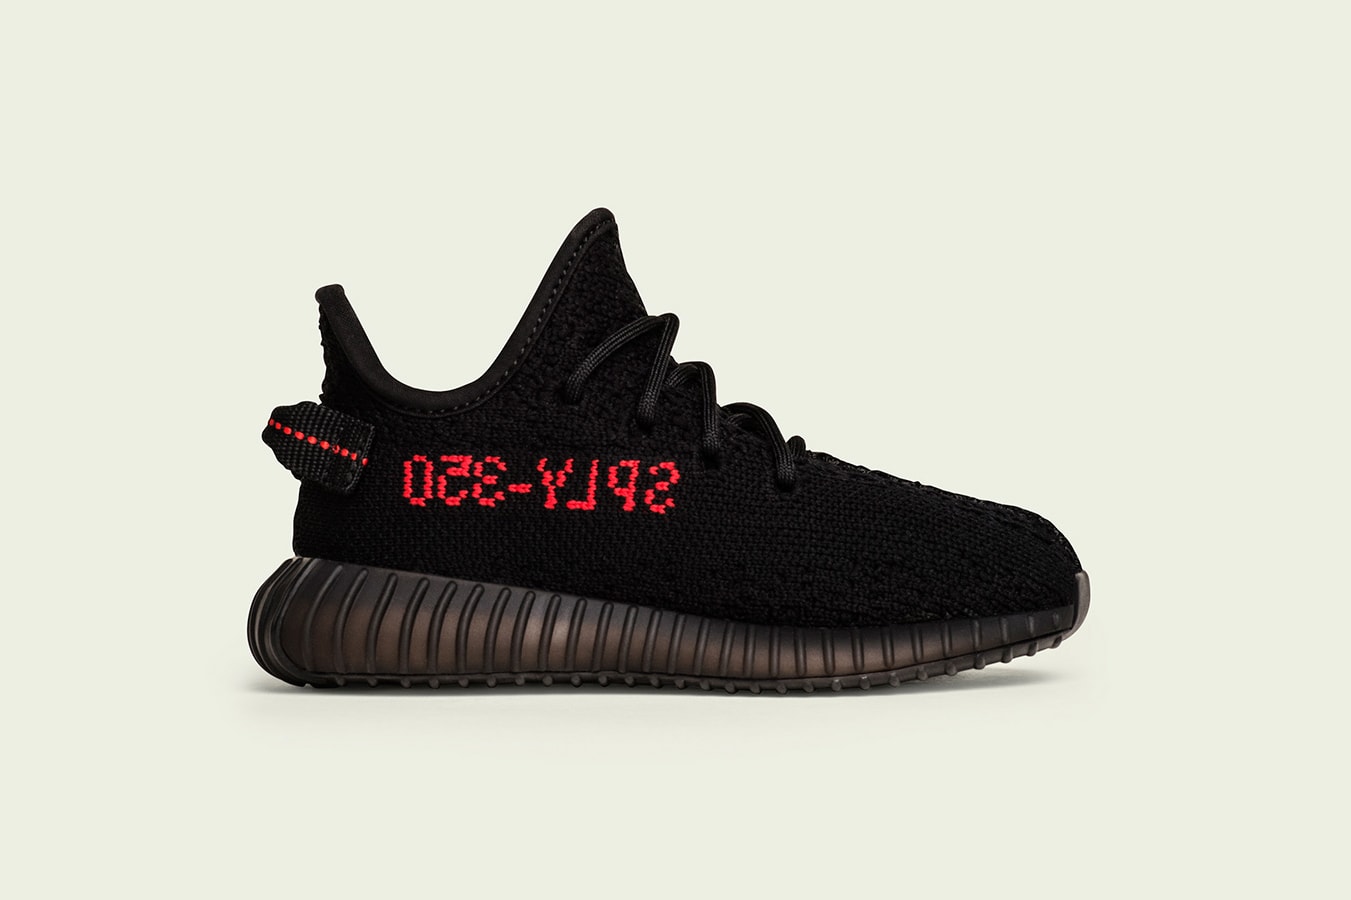 Adidas Yeezy Boost 350 V2 Black Red (2017/2020) for Women